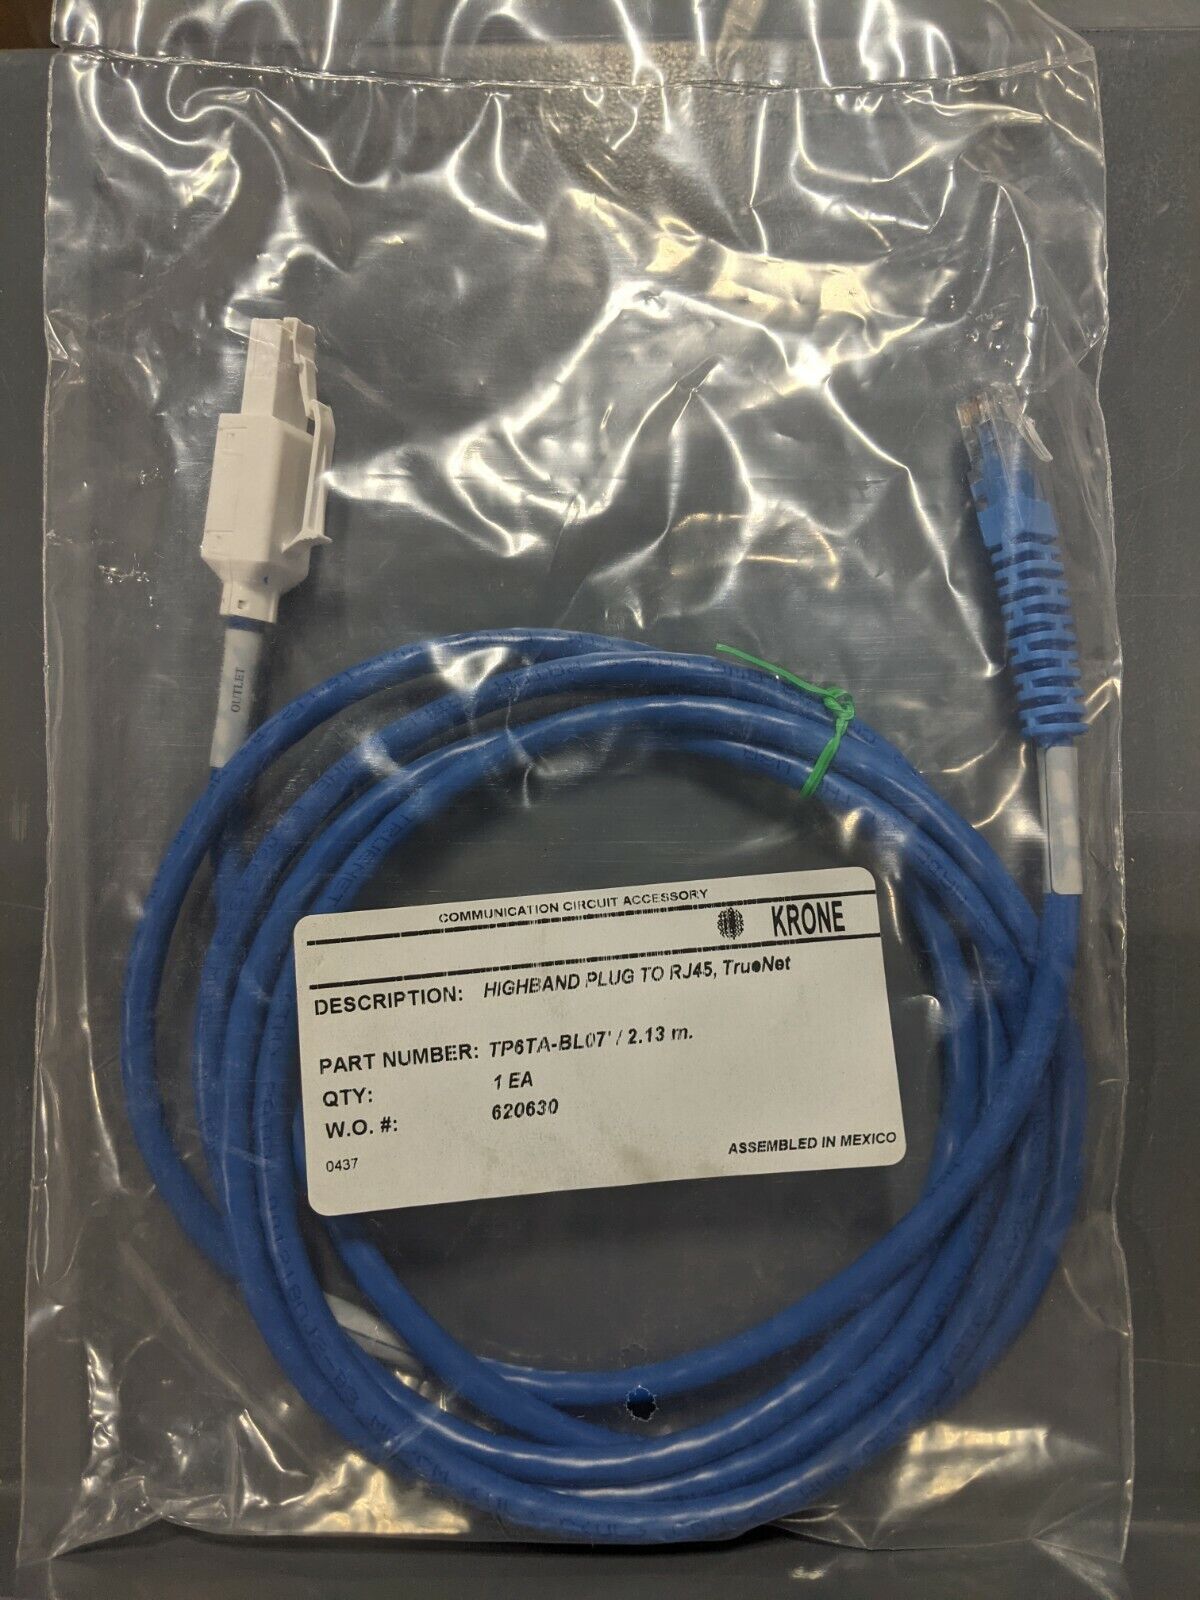 ADC/Krone TP6TA-BL07 Highband Plug to RJ45 Blue 7' CAT6 Patch Cable